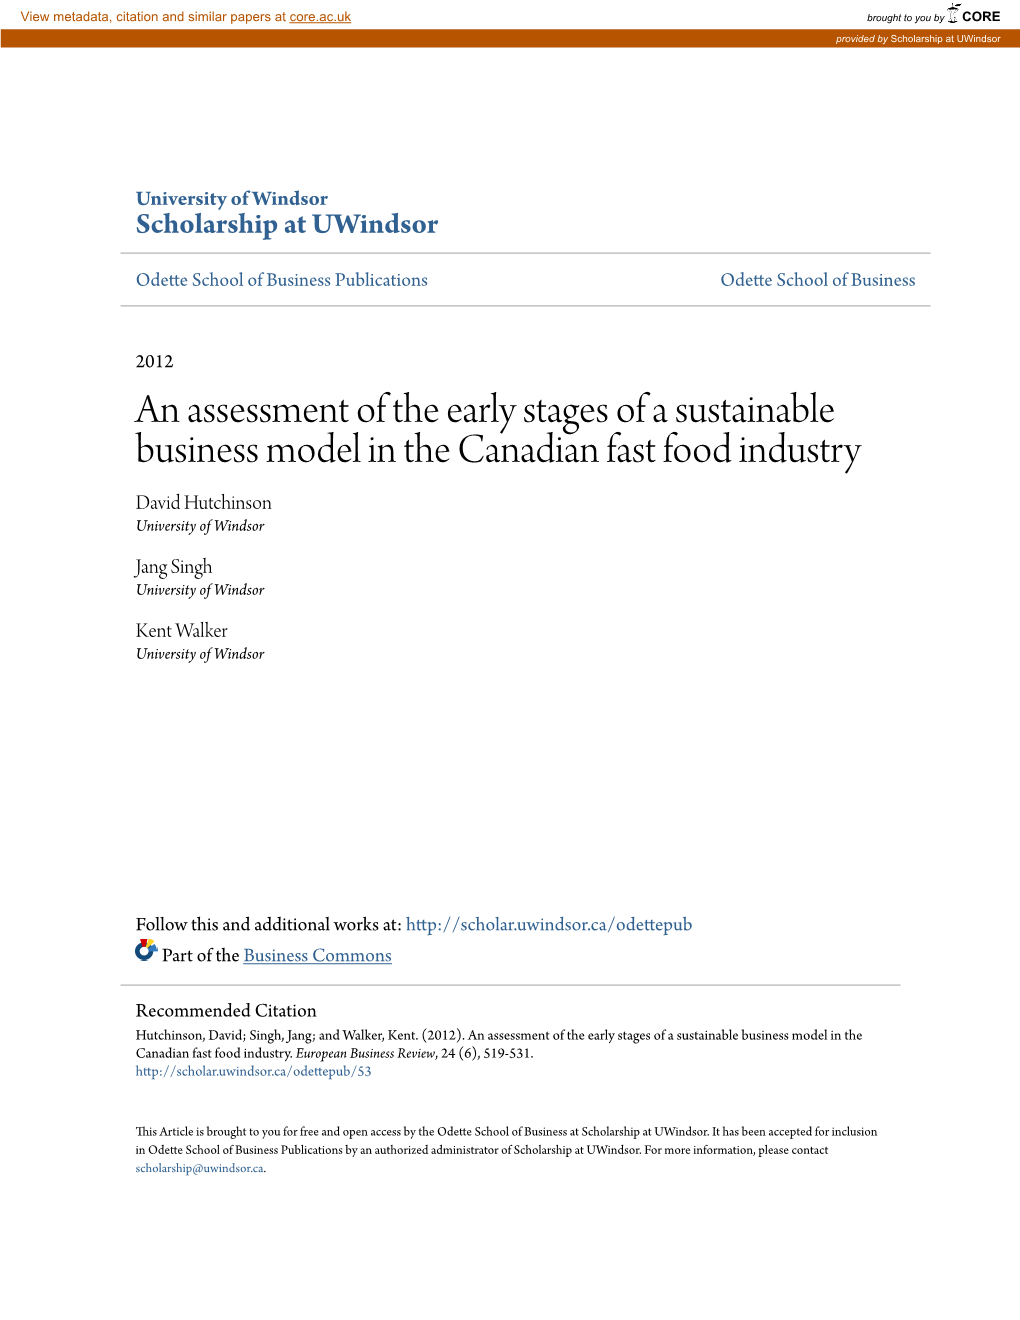 An Assessment of the Early Stages of a Sustainable Business Model in the Canadian Fast Food Industry David Hutchinson University of Windsor